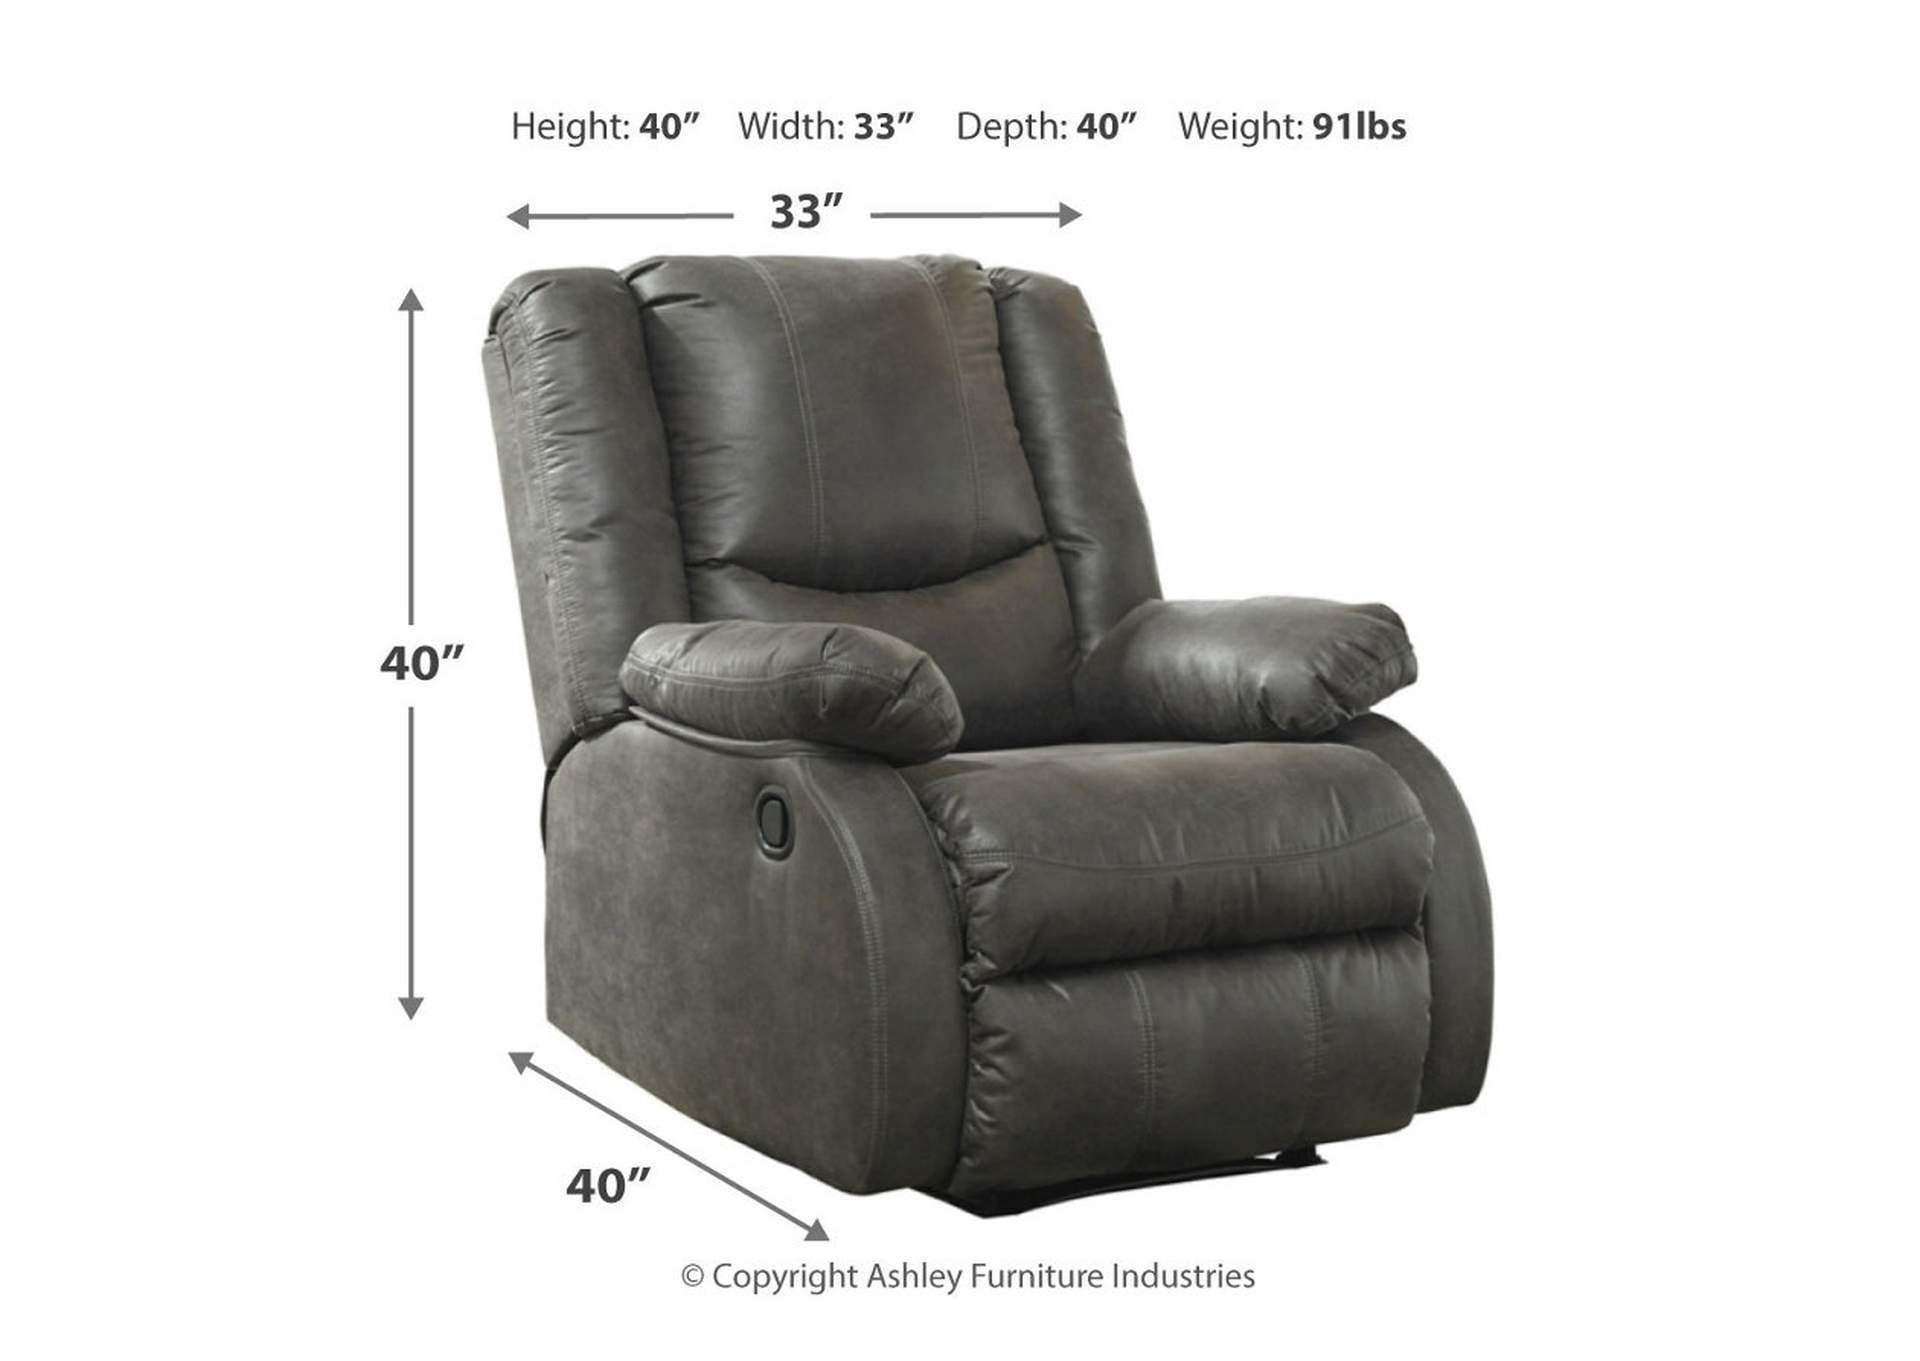 Bladewood Recliner,Direct To Consumer Express